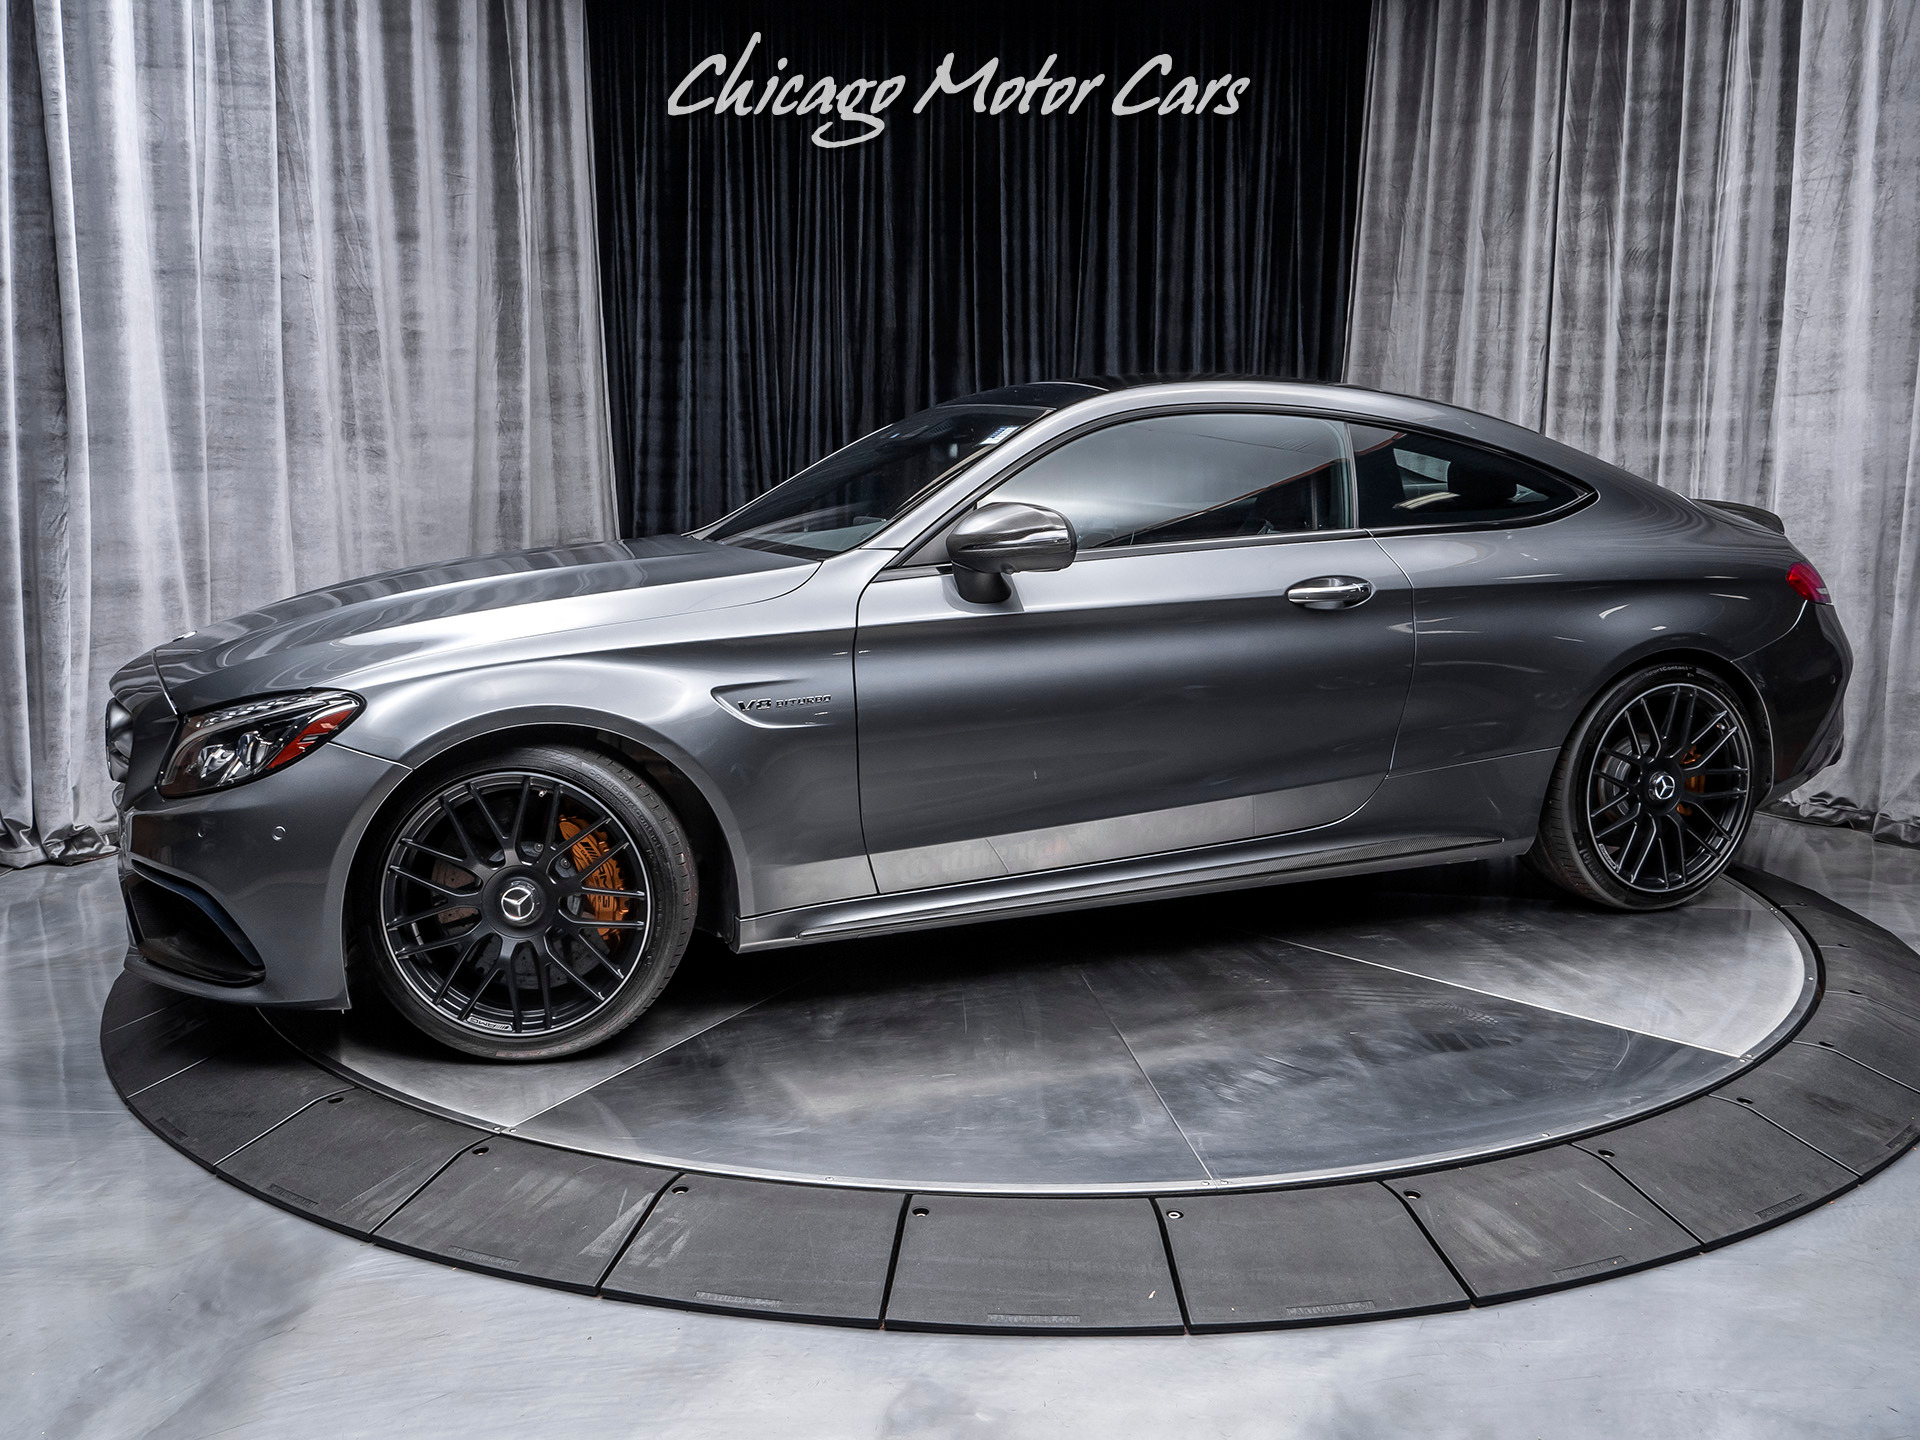 Used 2017 Mercedes Benz C63 Amg S Coupe For Sale Special